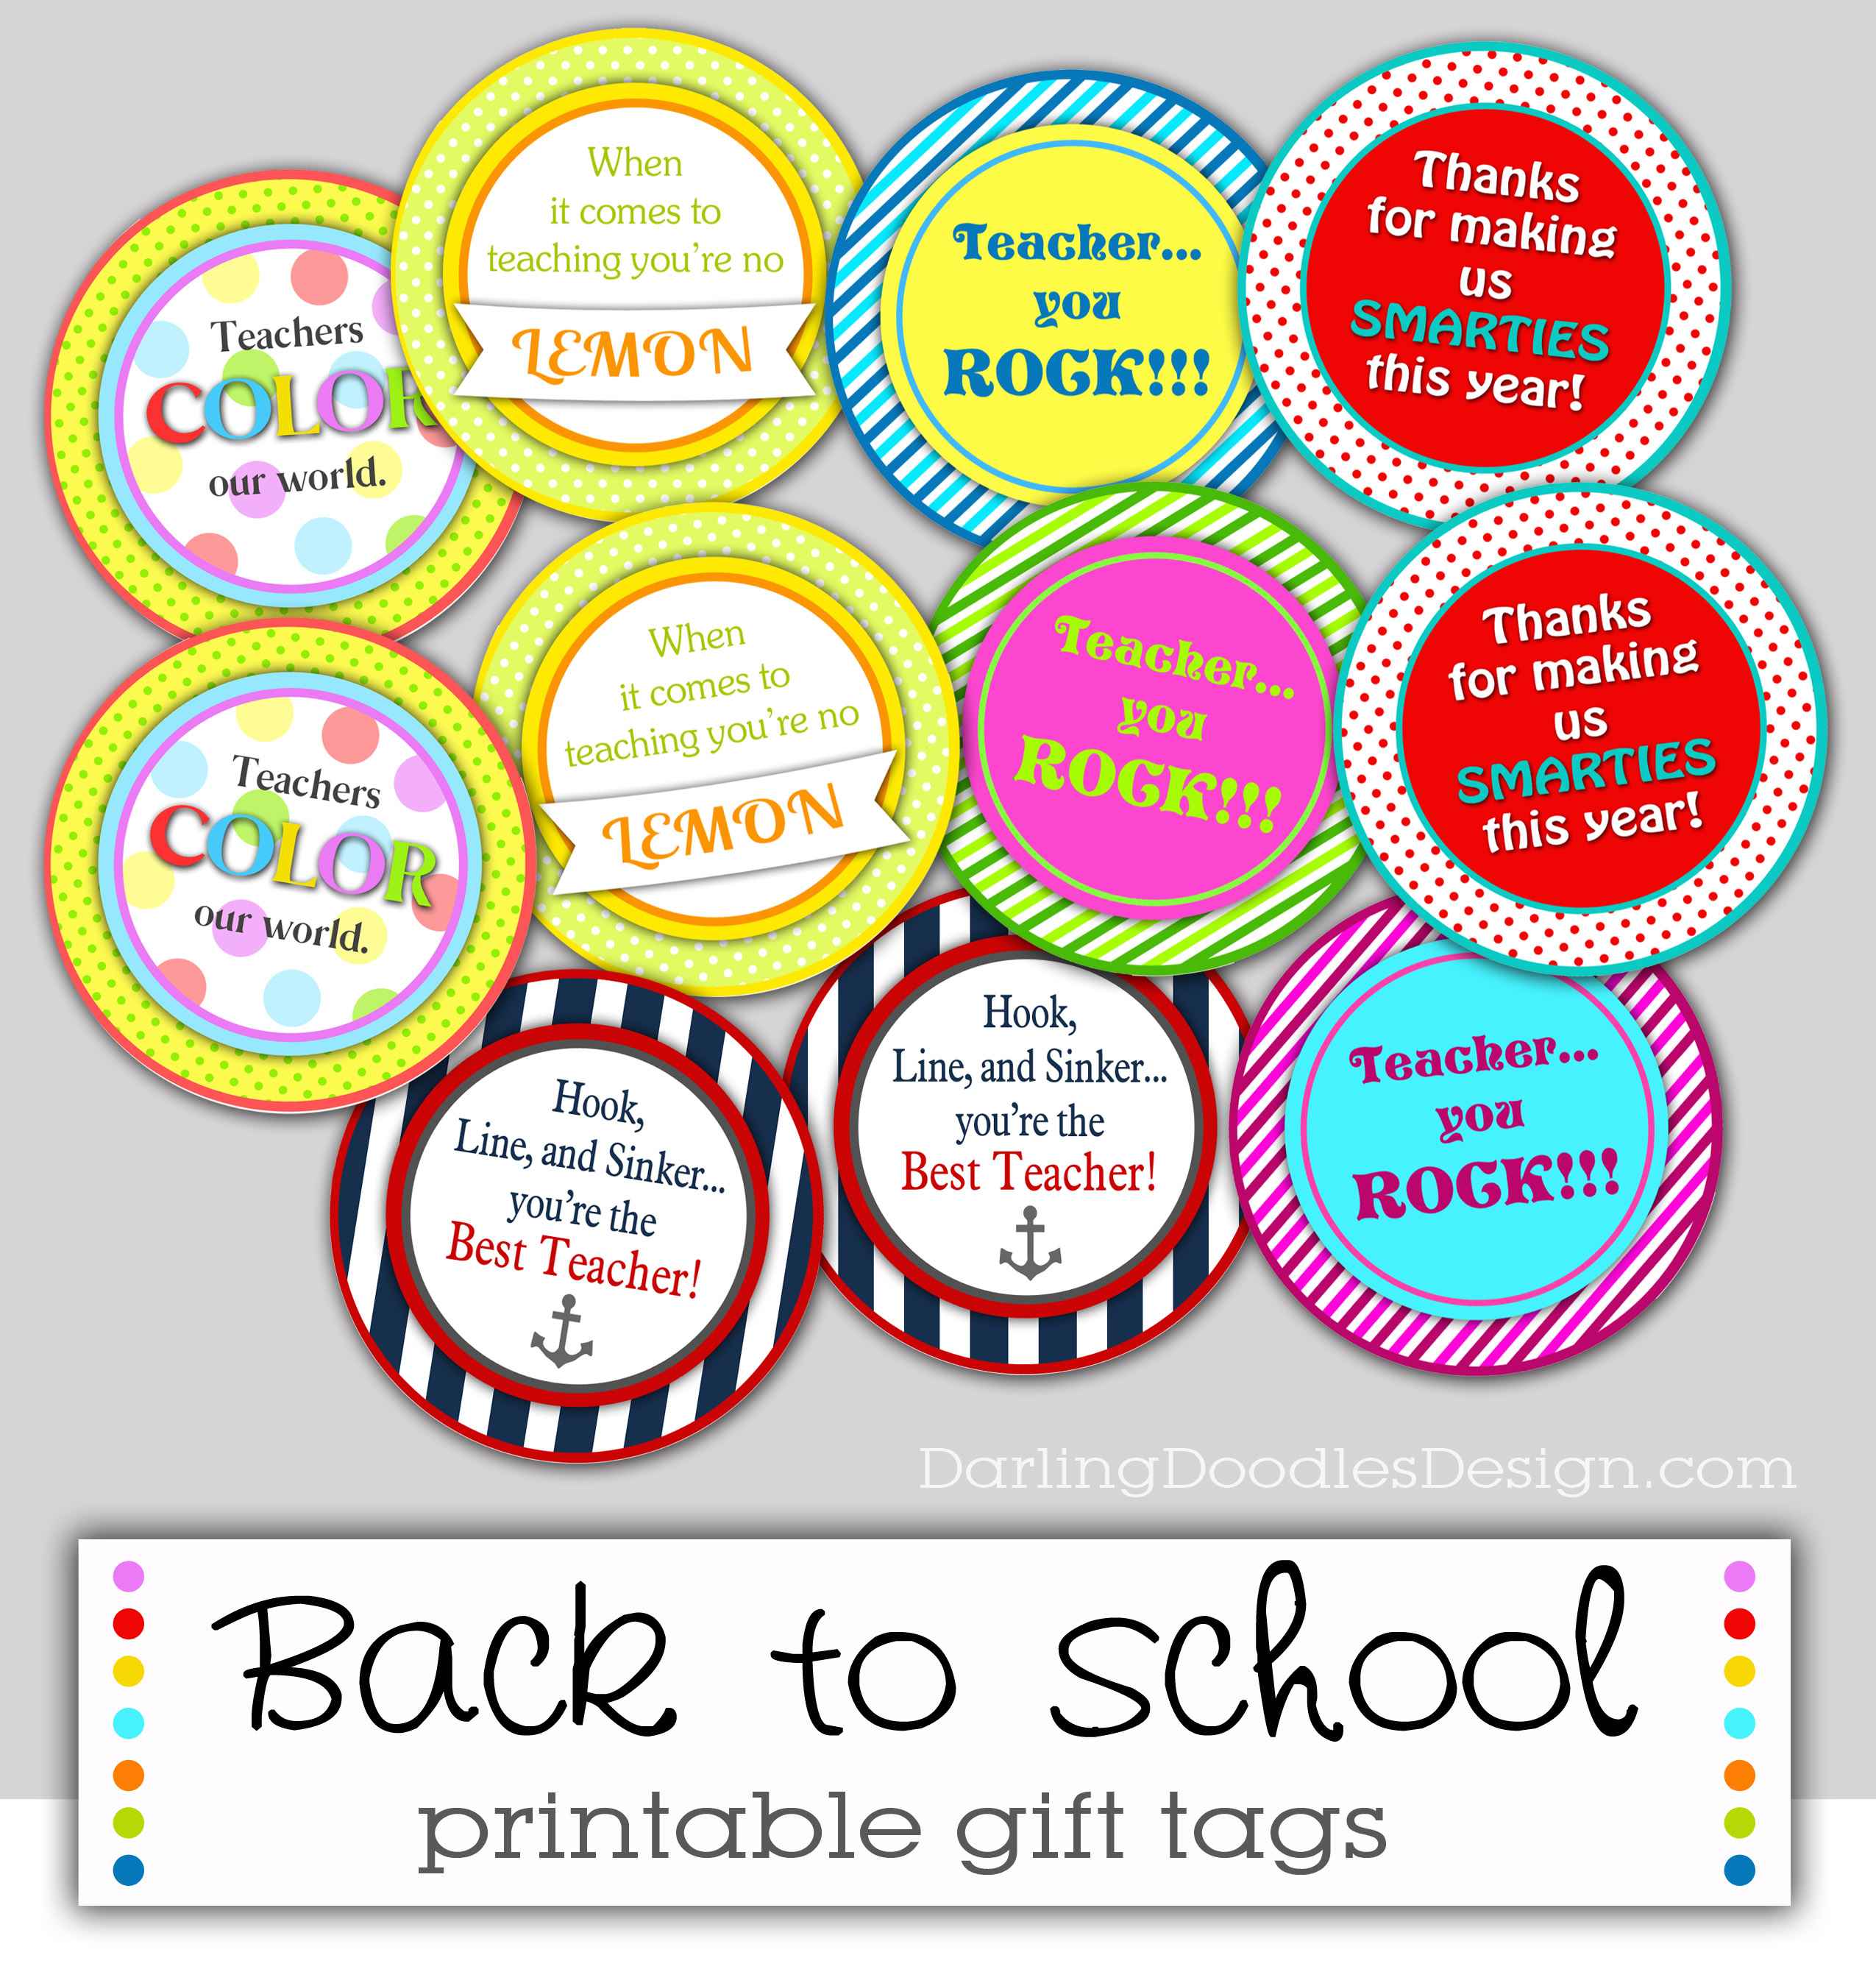 free-printable-end-of-school-gift-tags-teacher-gift-tags-school